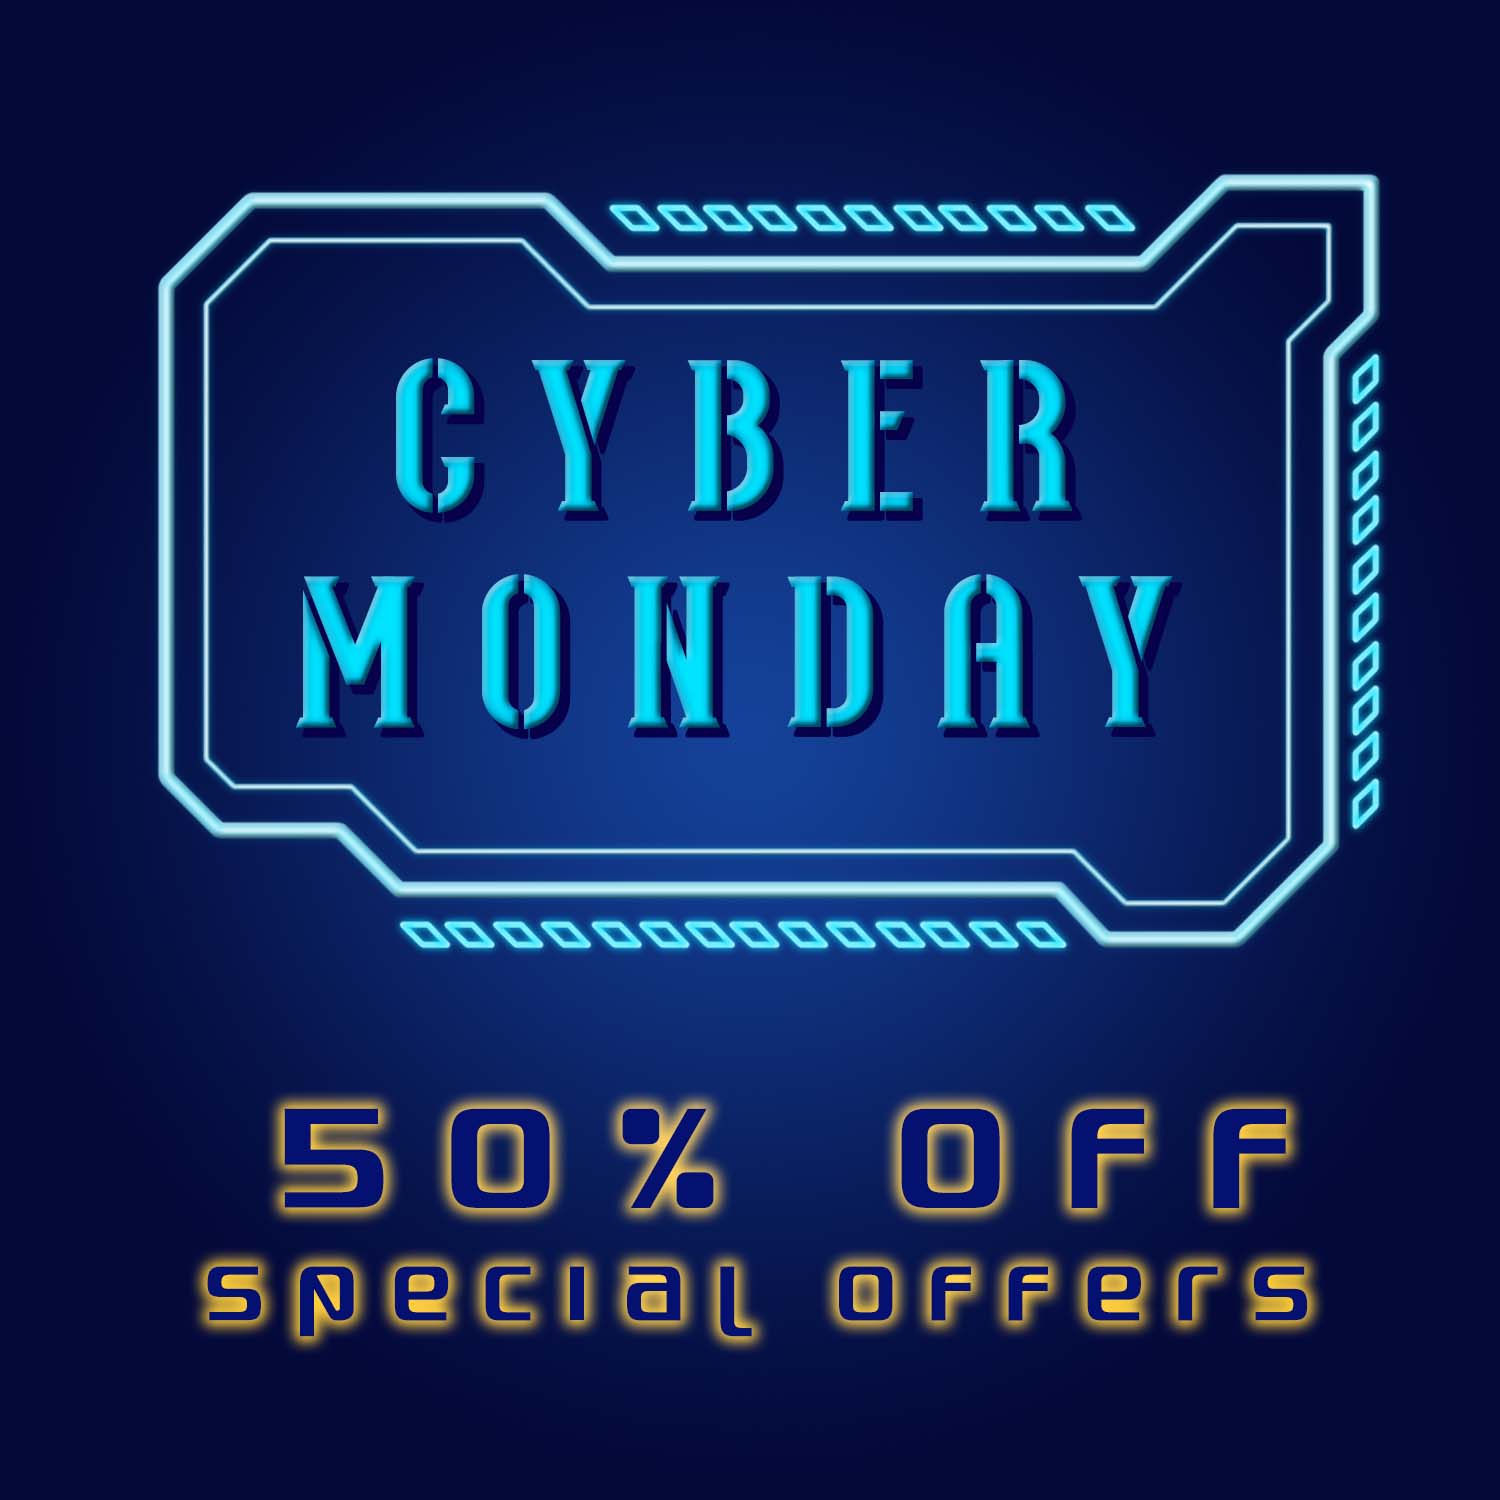 Cyber Monday Illustration Free Vector cover image.